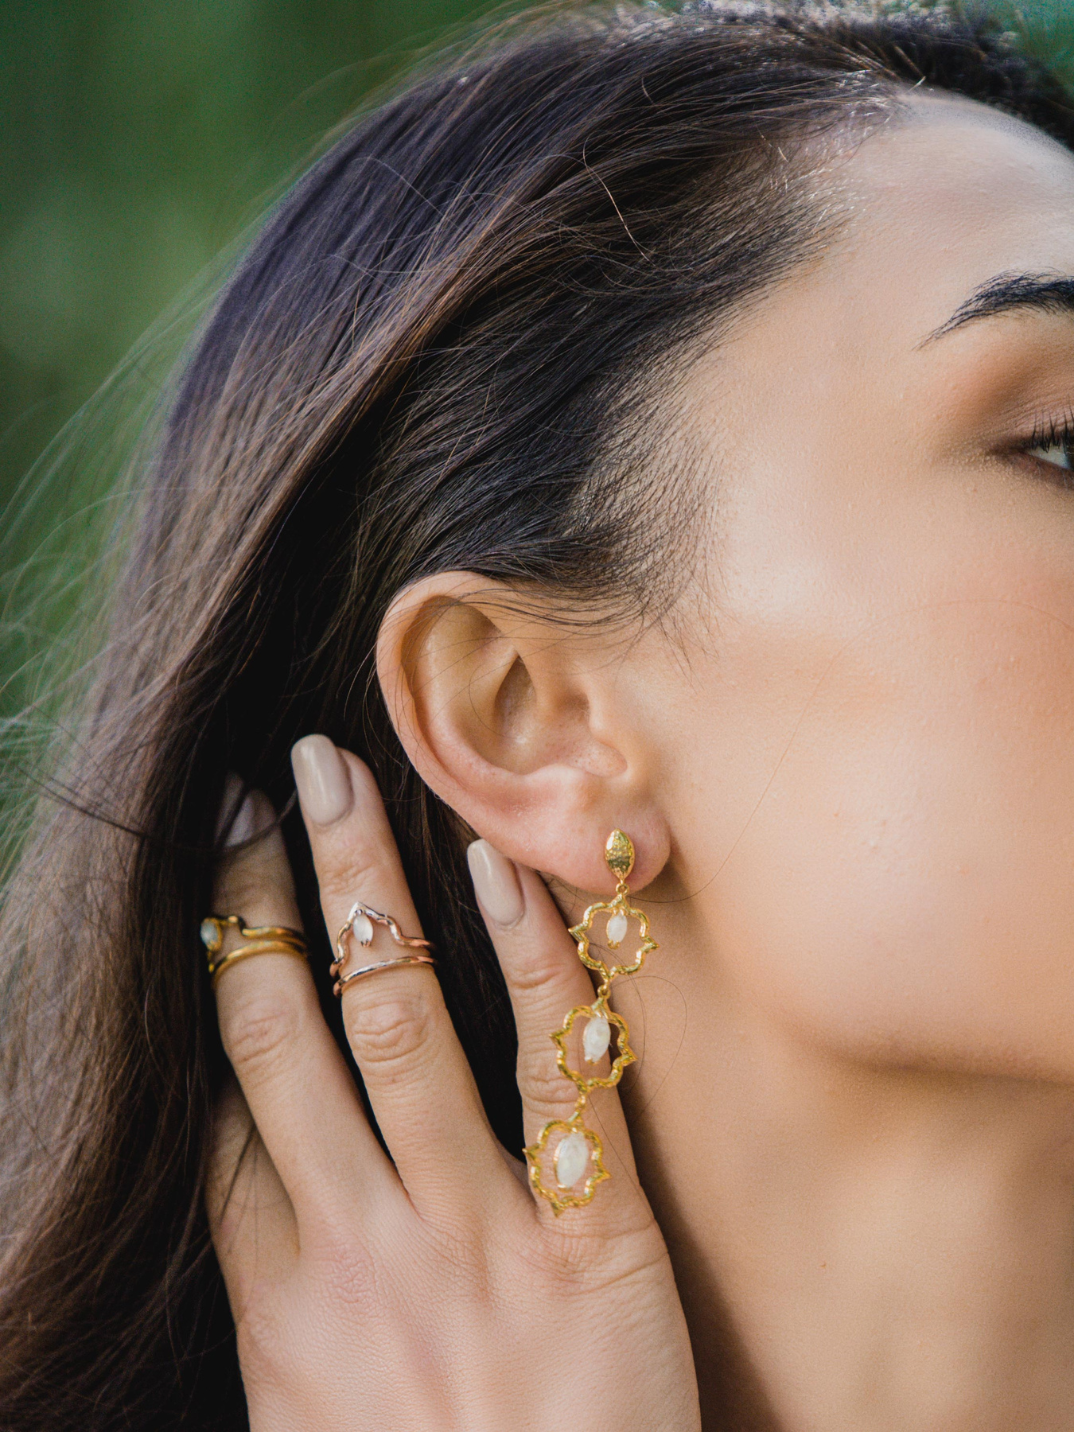 The exquisite combination of moonstone and vermeil gold will make it hard for you to take them off!  Ethical handcrafted sustainable jewelry made with semi-precious stones